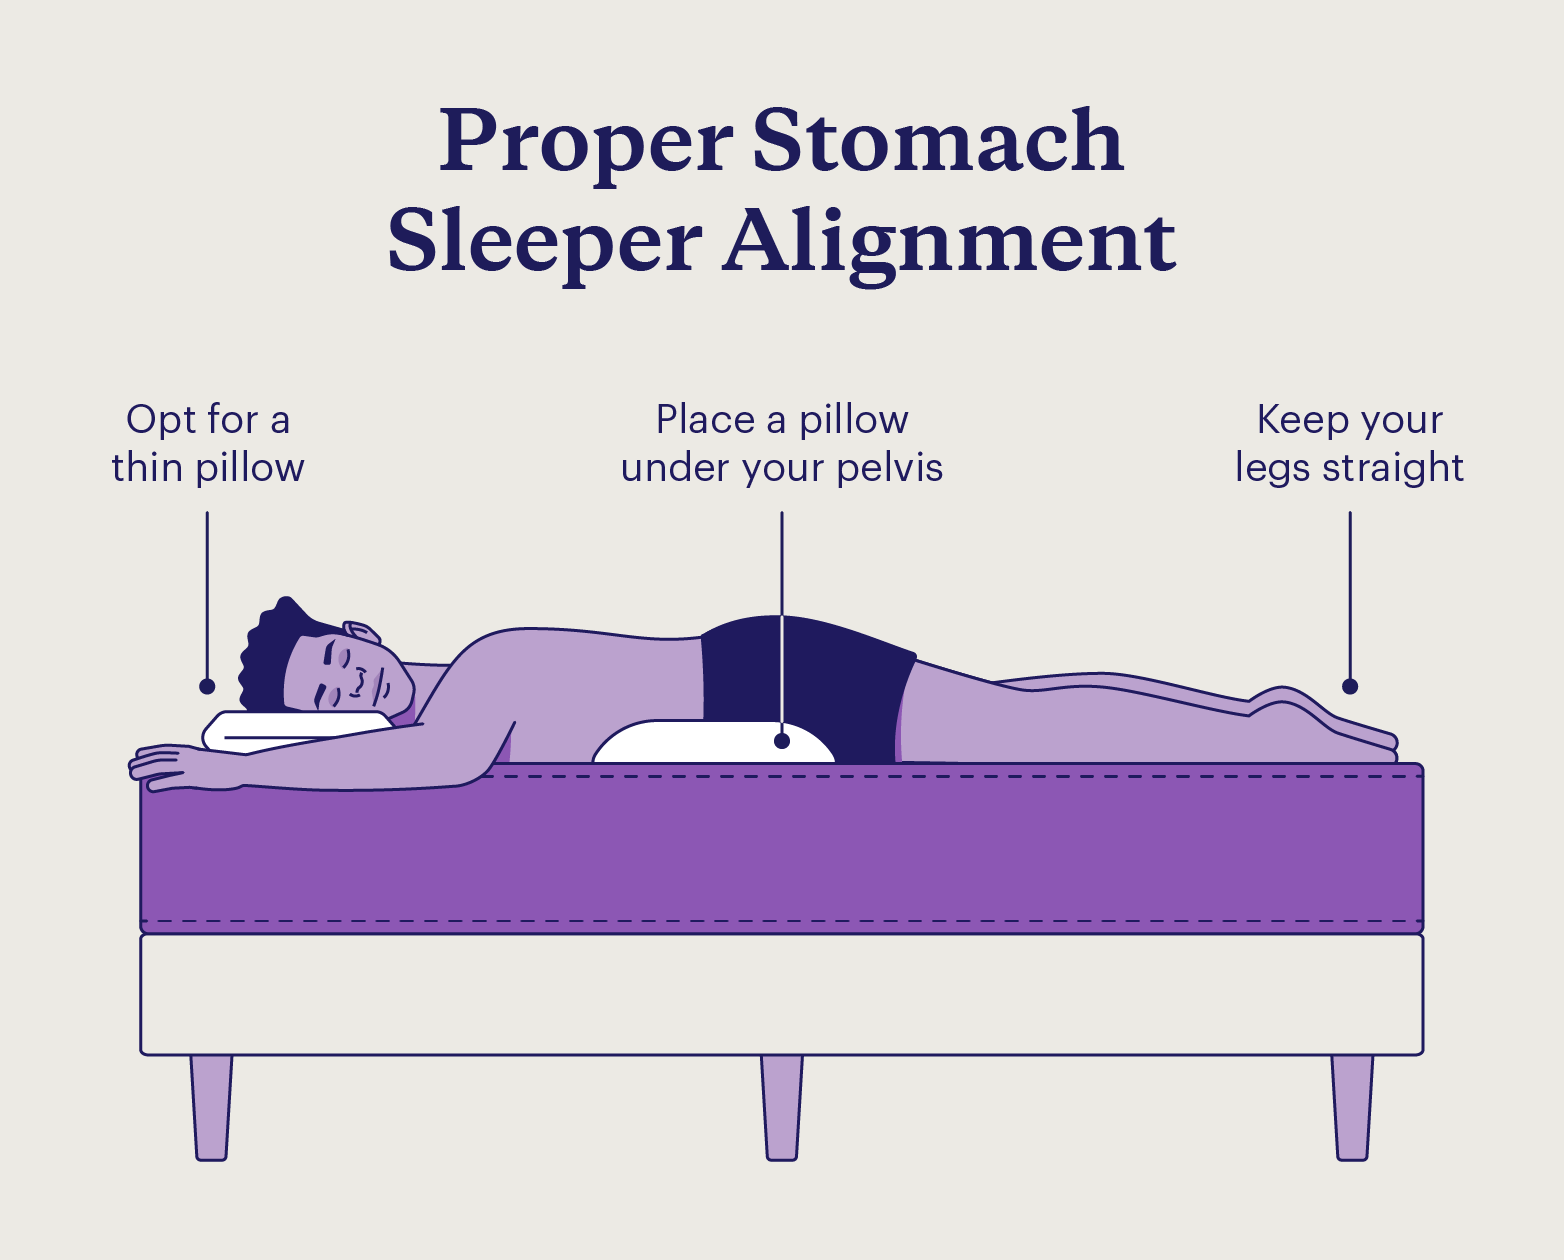 Graphic illustrating the proper stomach sleeper alignment with tips.